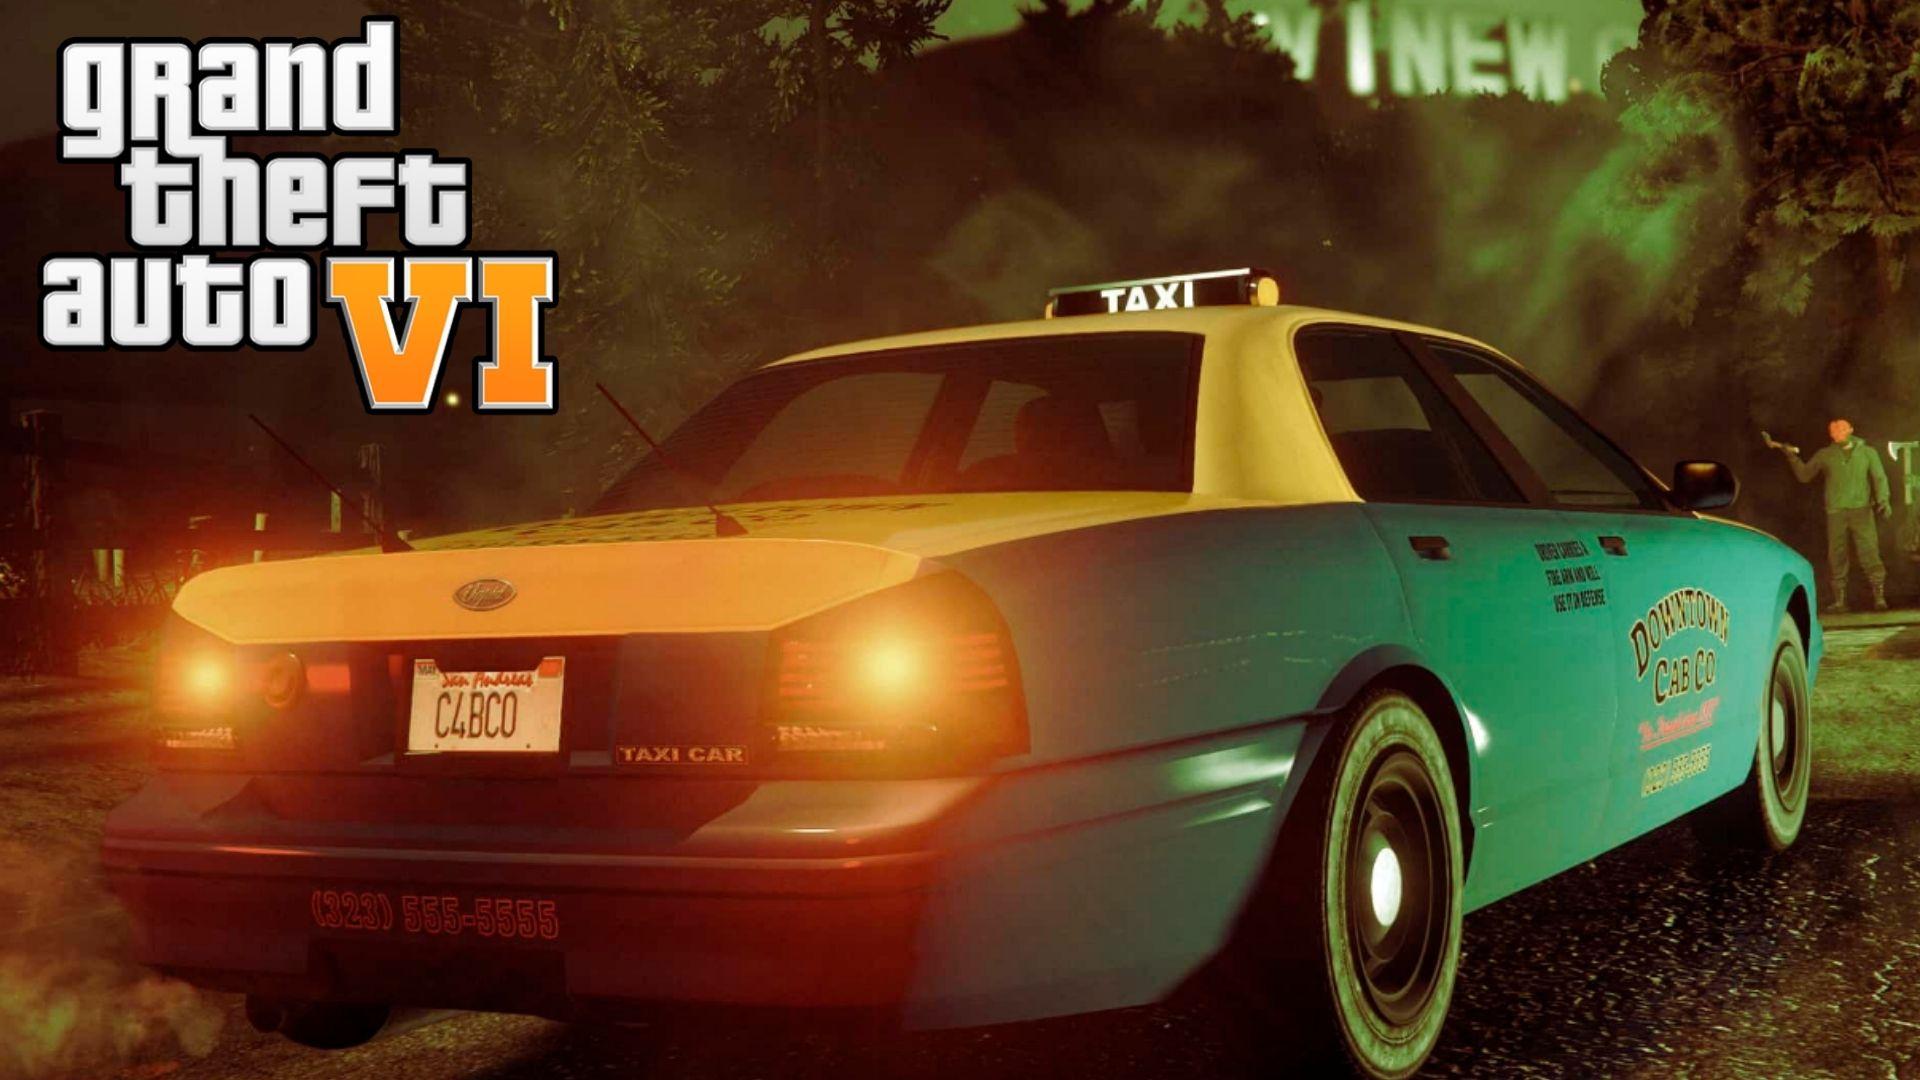 GTA online taxi surronded by zombies and monsters with GTA 6 logo